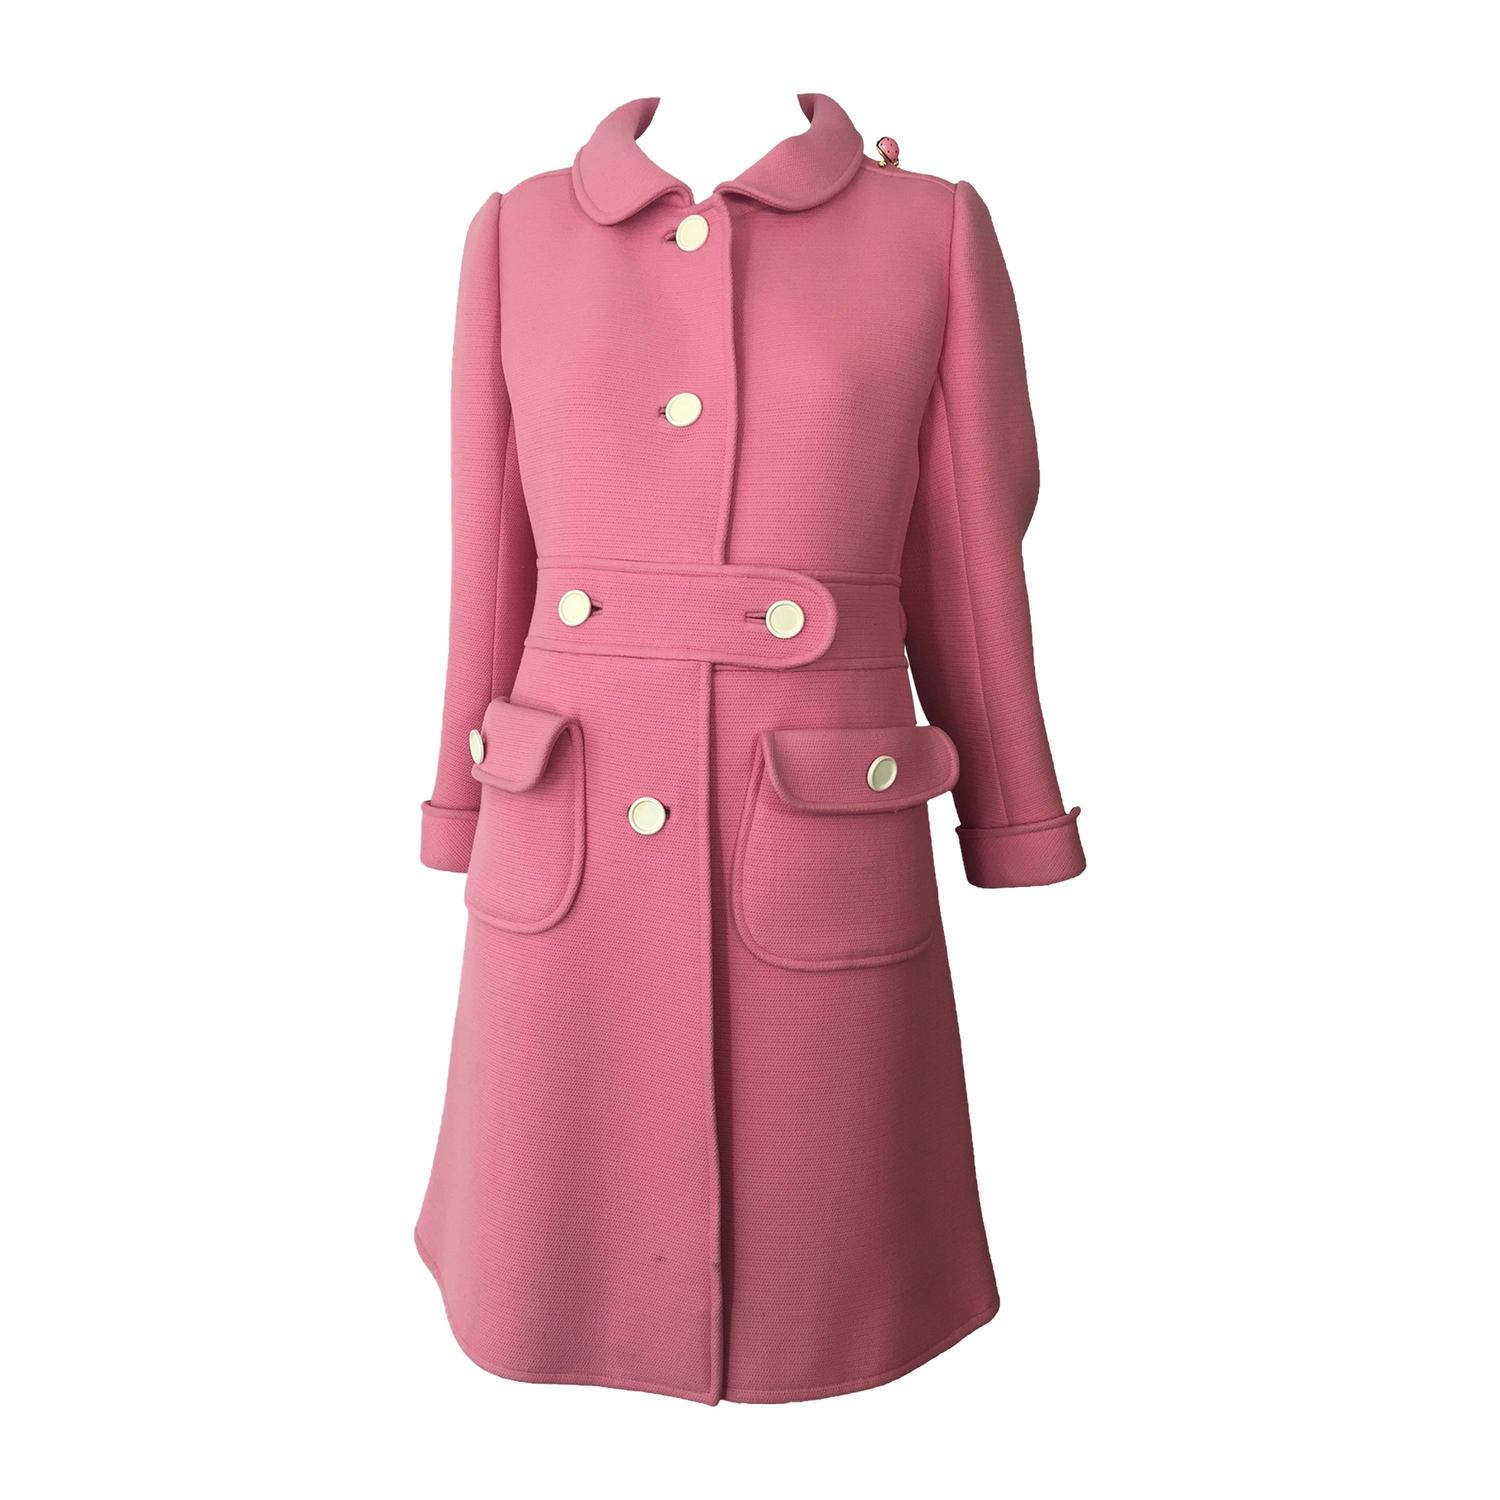 1960s Courreges Pink Wool Mod Coat with White Buttons For Sale at 1stdibs